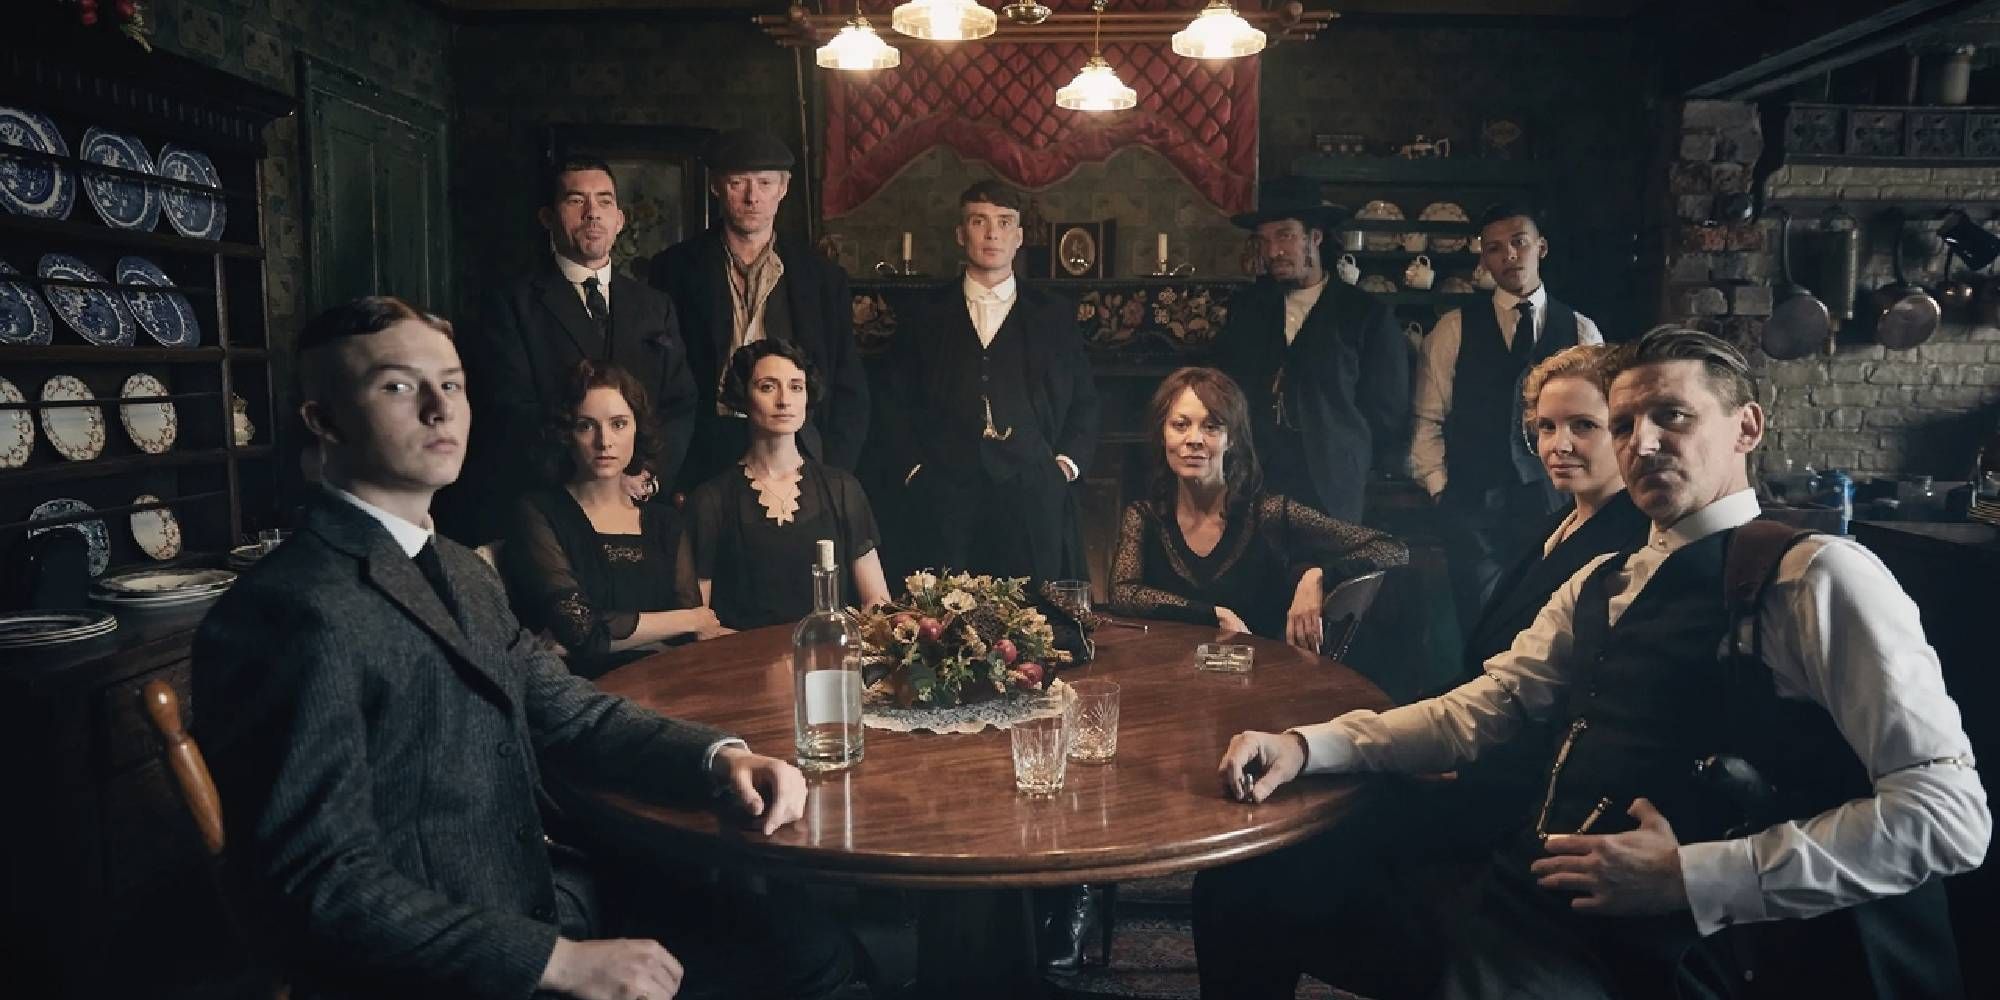 From left to right: Harry Kirton as Finn Shelby, Sophie Rundle as Ada Shelby, Packy Lee as Johnny Dogs, Ned Dennehy as Charlie Strong, Natasha O'Keeffe as Lizzie Stark, Cillian Murphy as Tommy Shelby, Helen McCrory as Polly Gray, Benjamin Zephaniah as Jeremiah, Daryl McCormack as Isaiah, Kate Phillips as Linda Shelby, and Paul Anderson as Arthur Shelby.